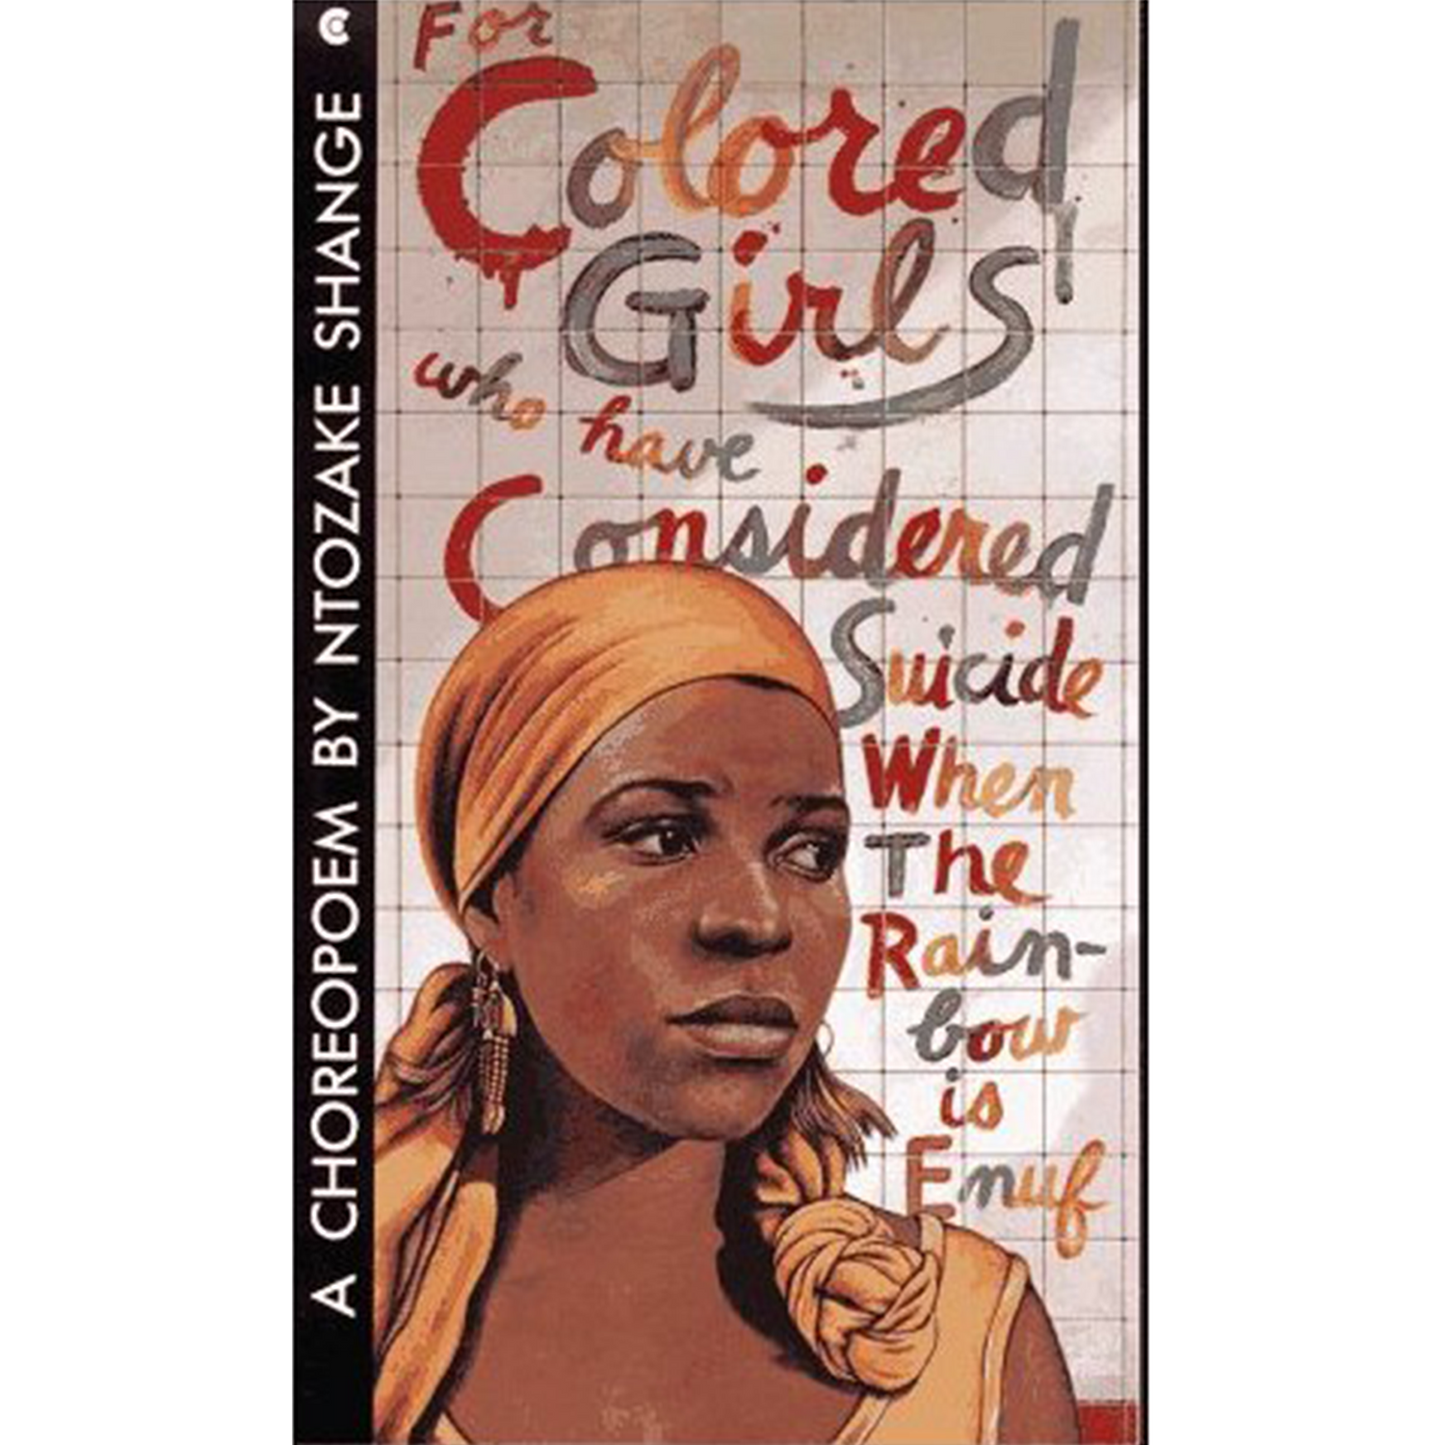 For Colored Girls Who Have Considered Suicide When The Rainbow Is Enuf (Paperback)